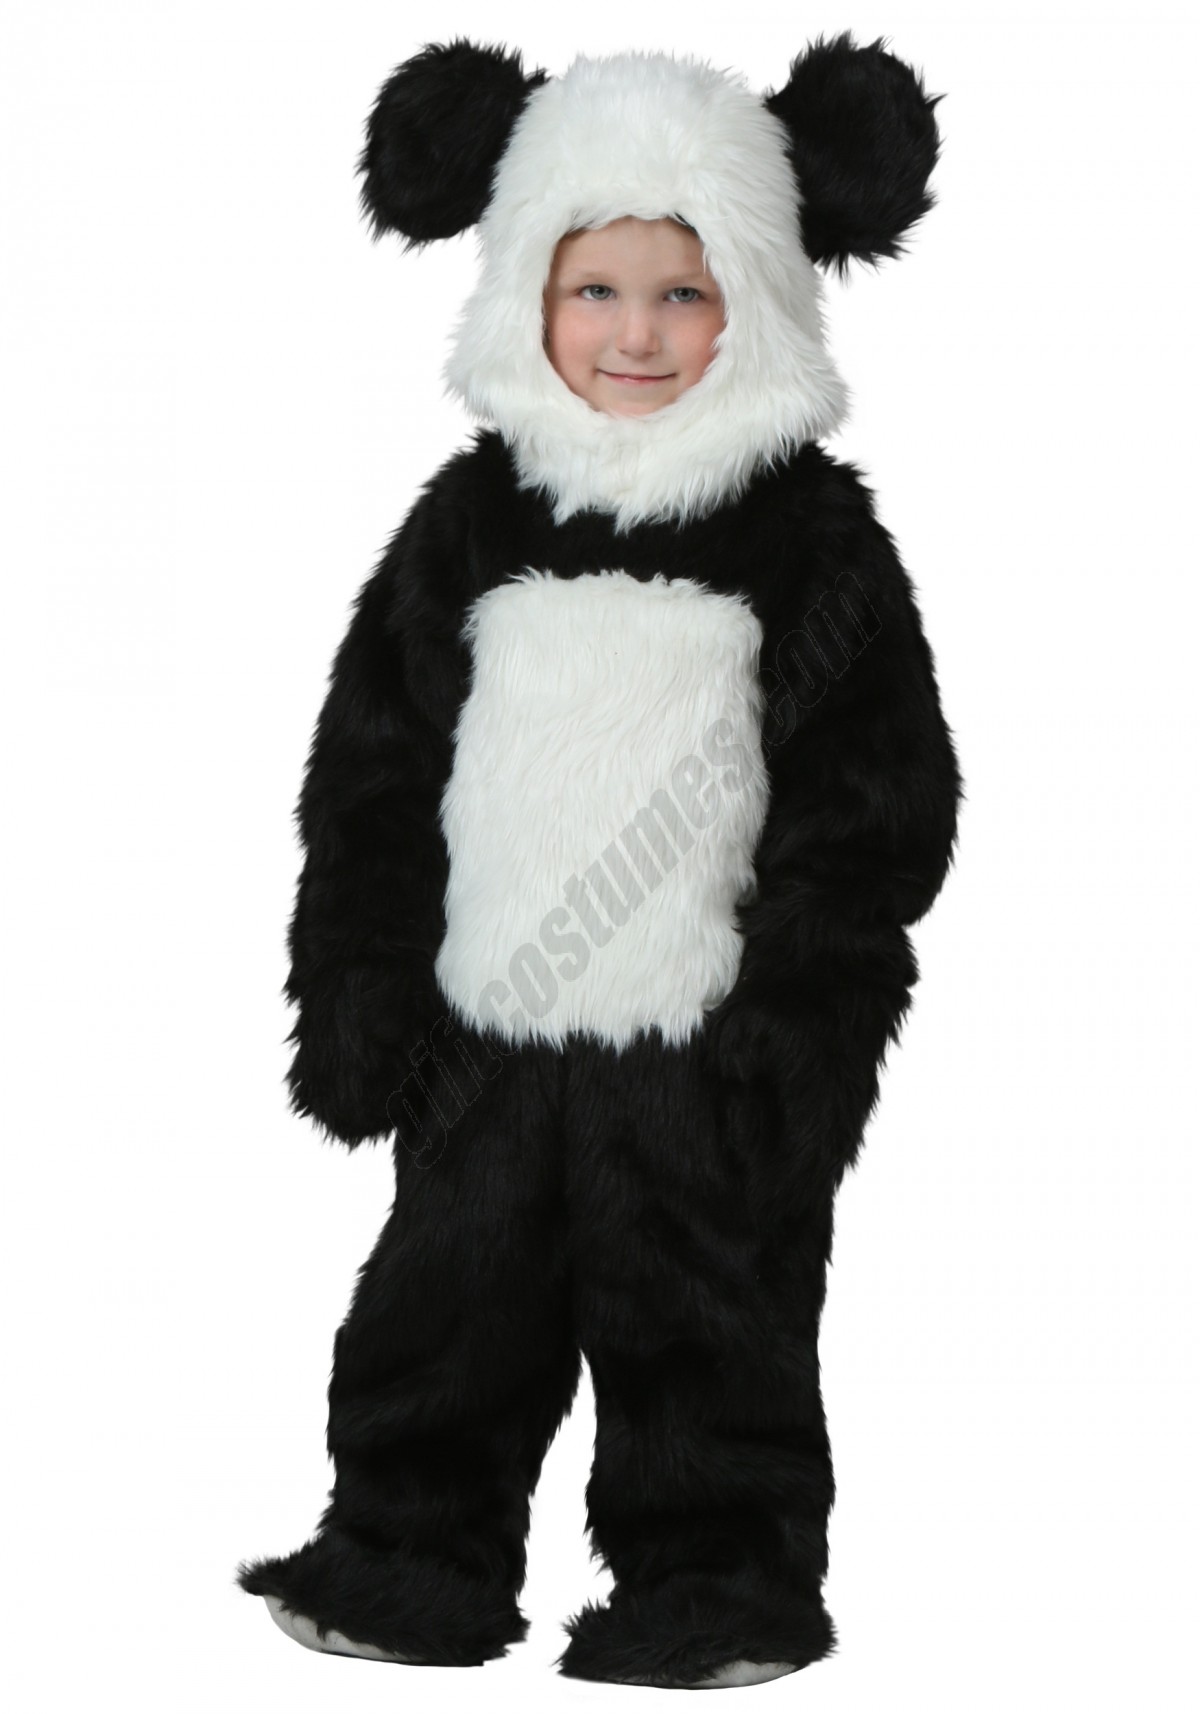 Toddler Deluxe Panda Costume Promotions - -0